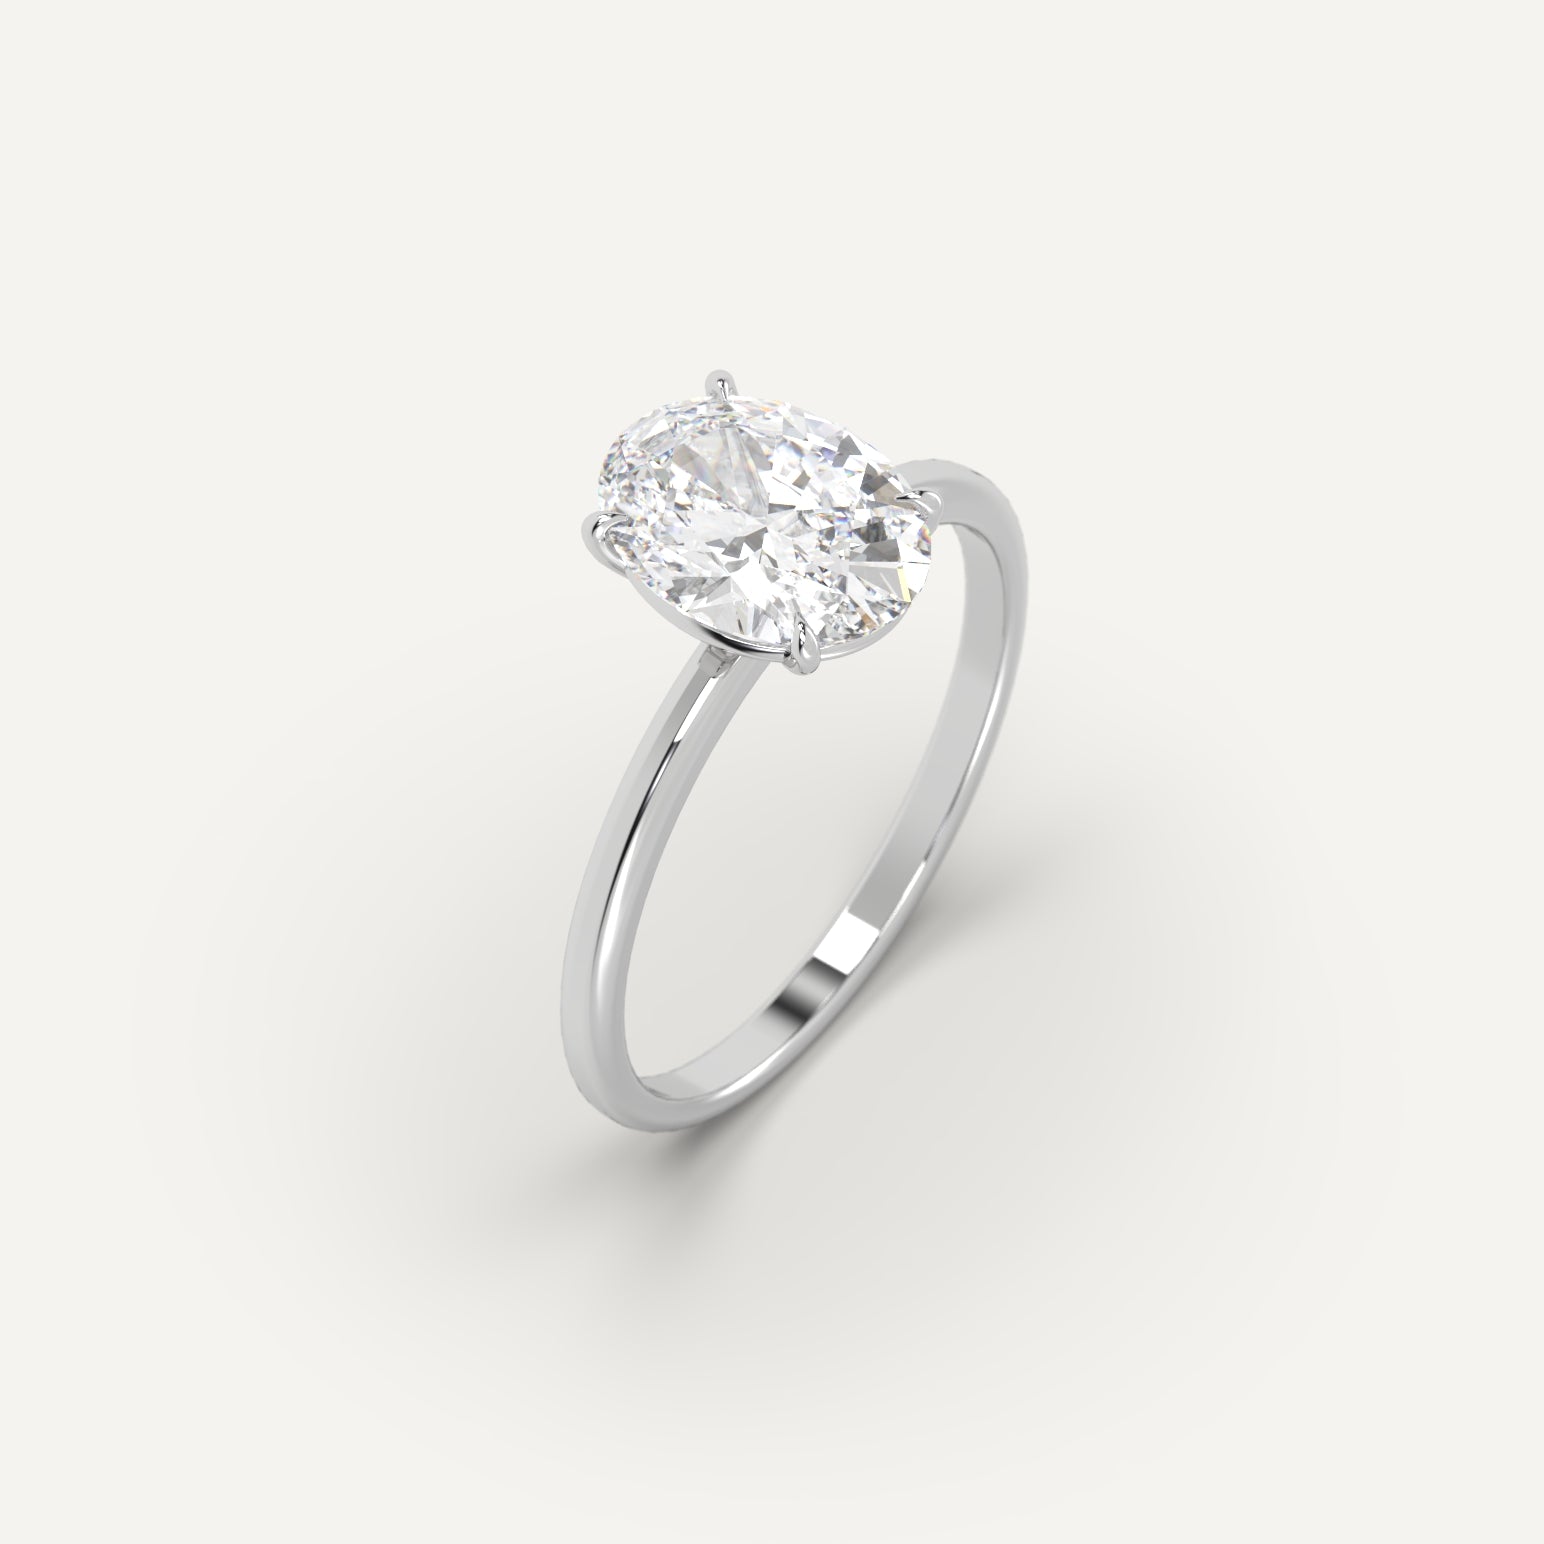 1.5 carat Oval Cut Engagement Ring in 14k White Gold